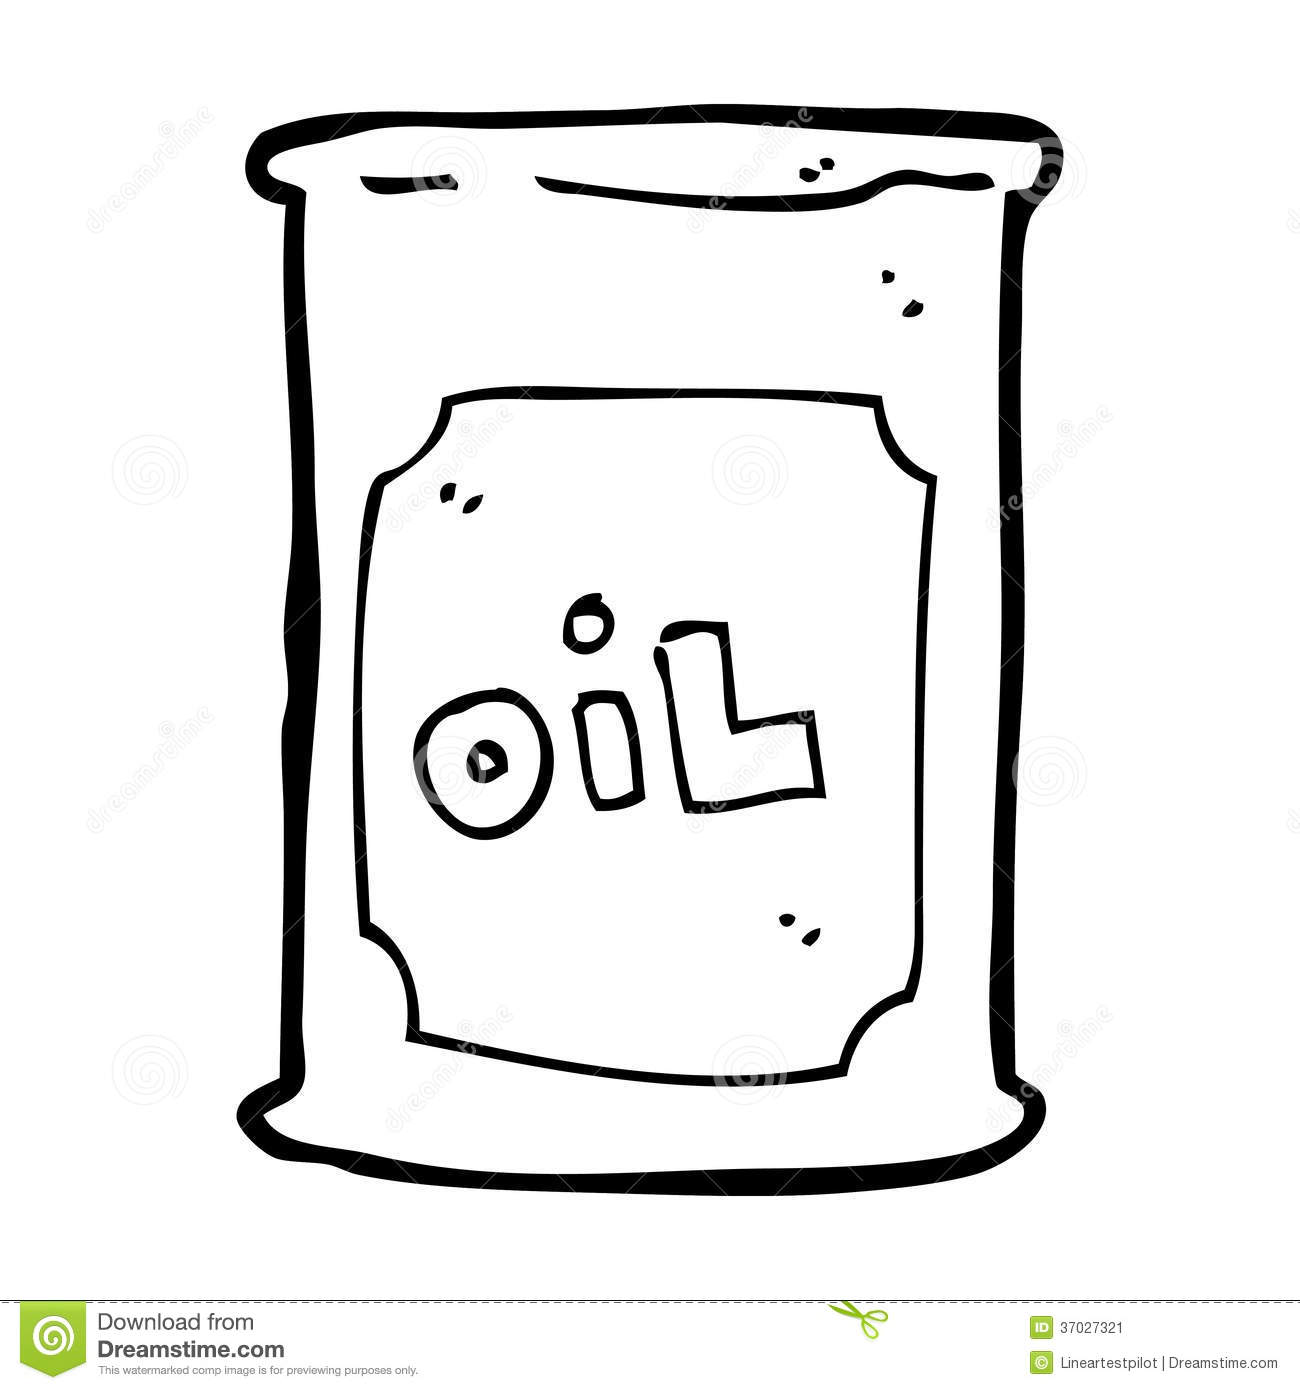 oil clipart black and white